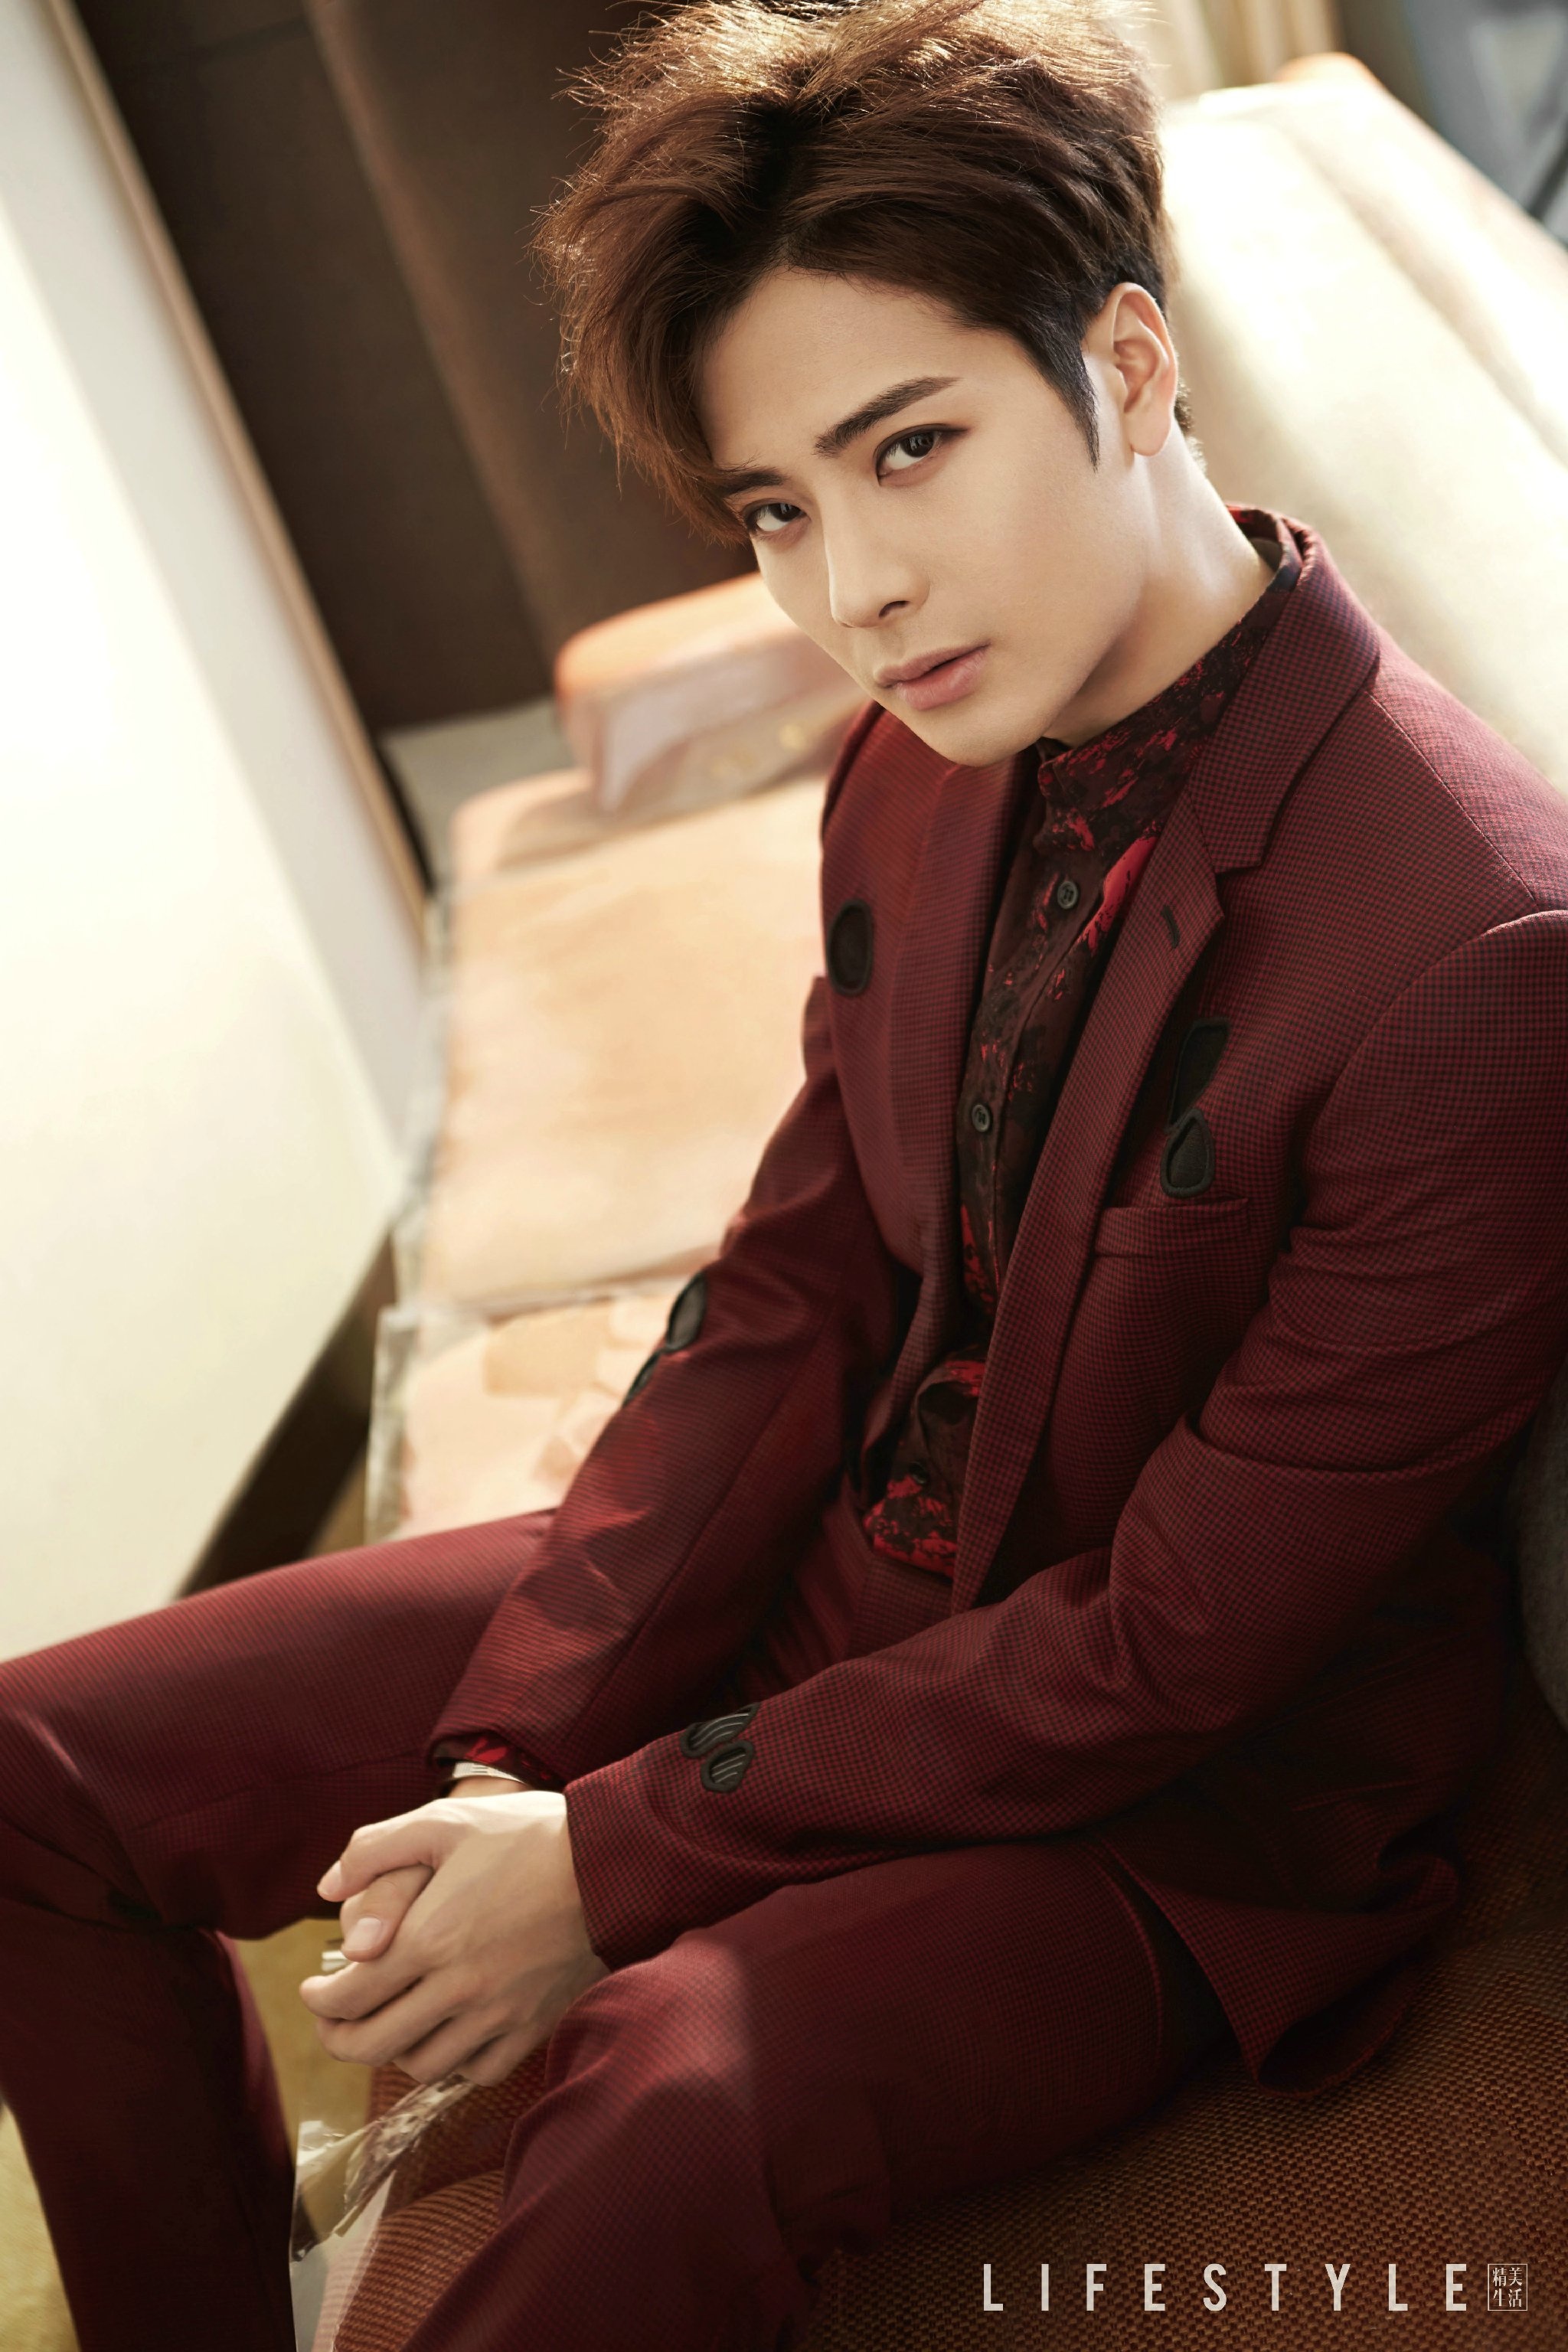 Jackson Android iPhone Wallpaper Asiachan Kpop Image Board